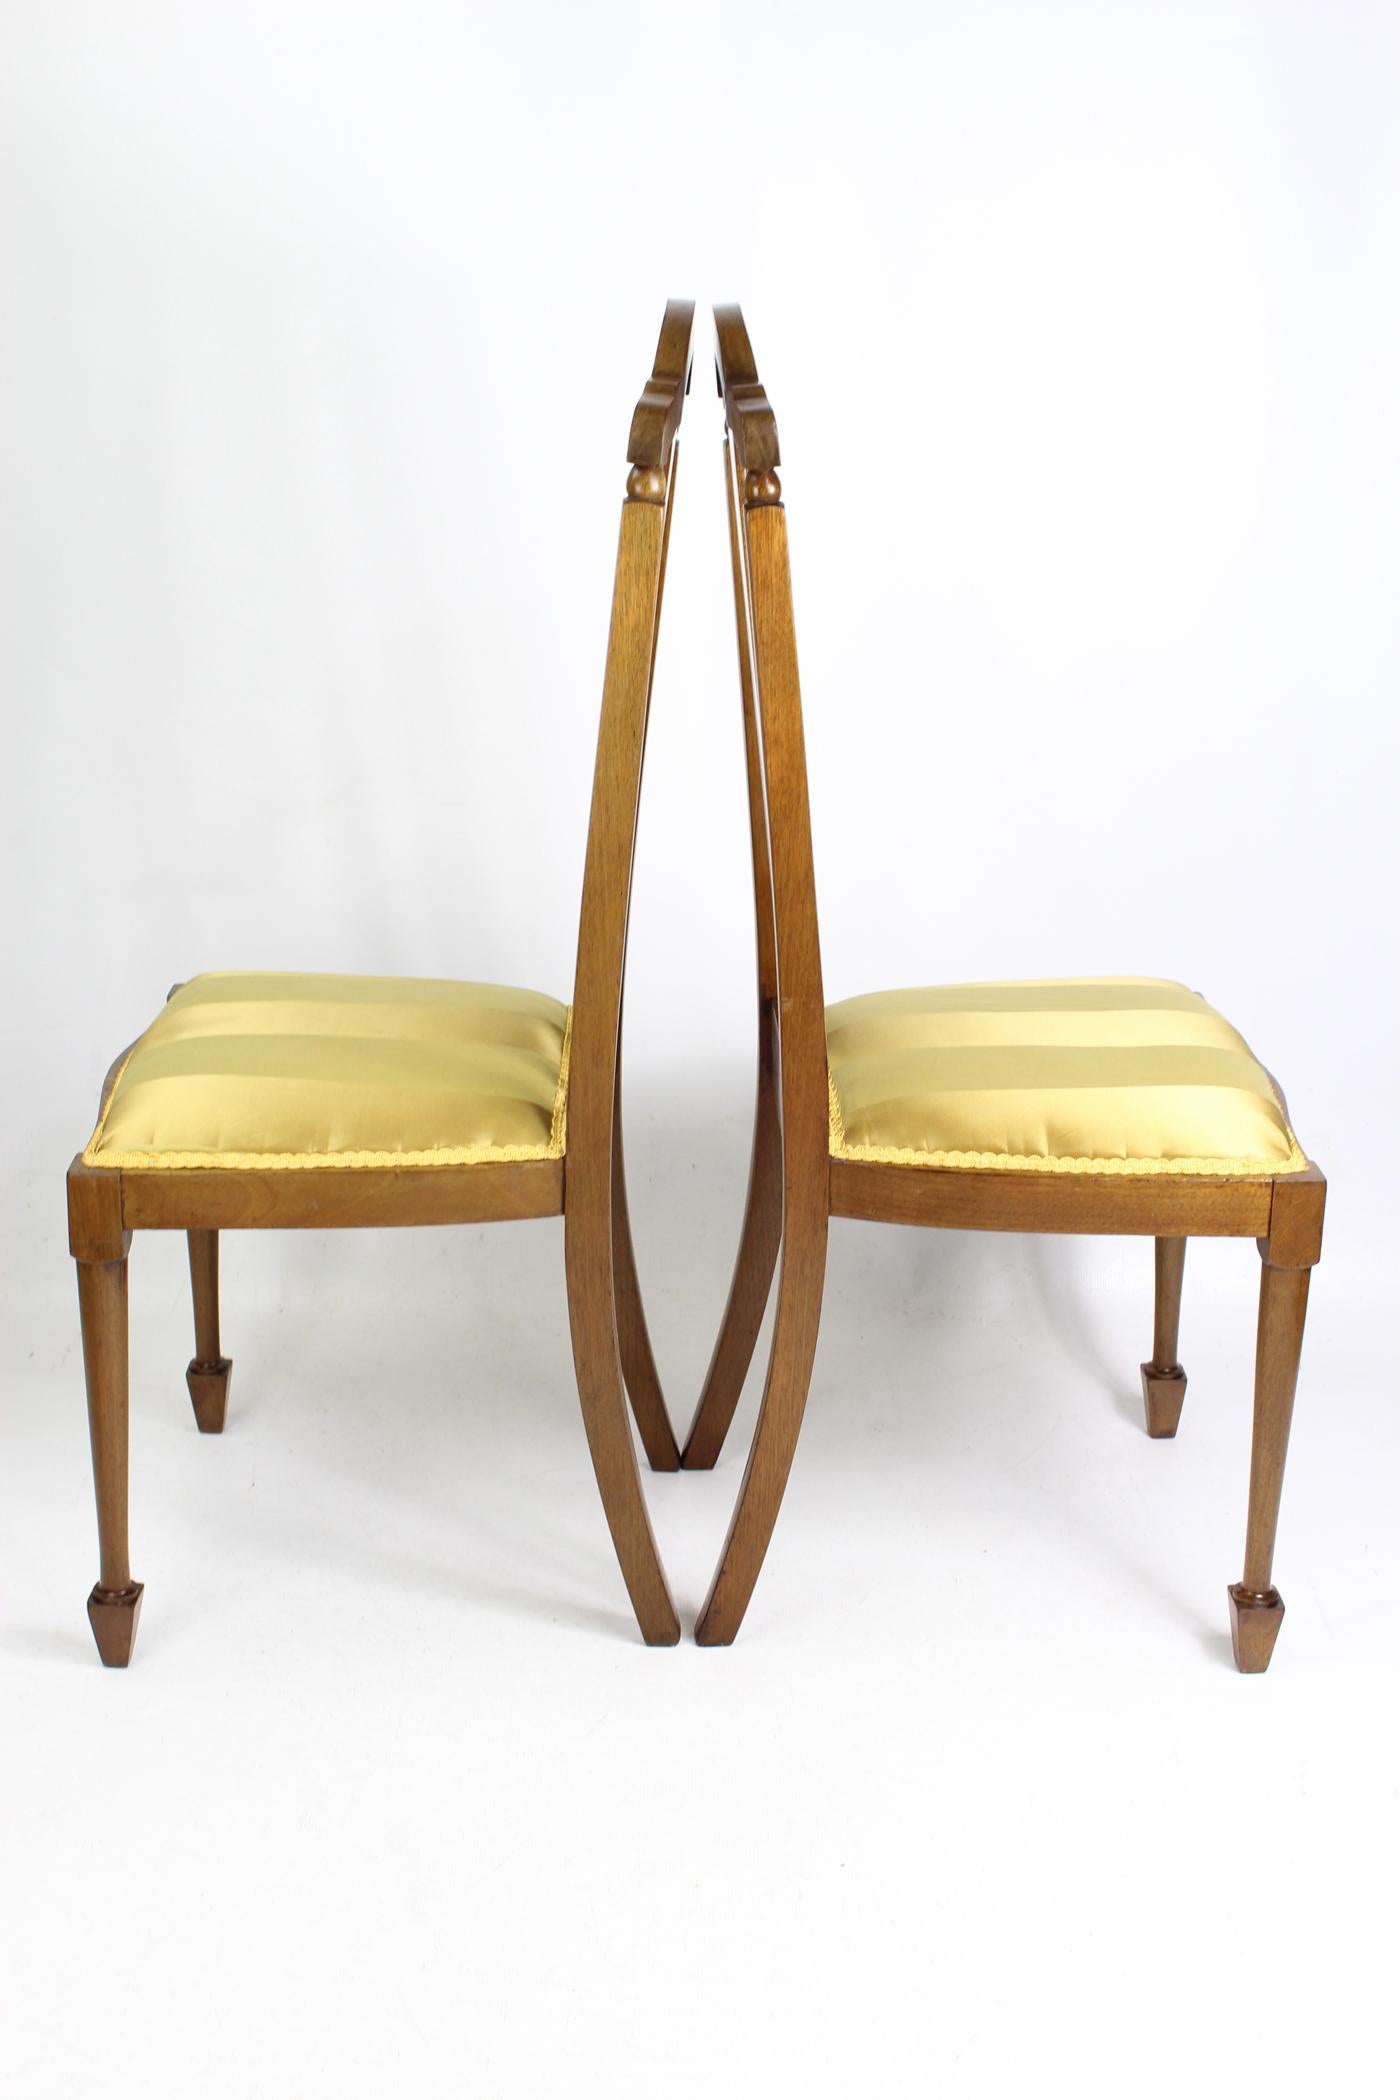 A stylish pair of antique Edwardian mahogany side chairs dating from circa 1910. With curved top rails and rail backs with attractive inlay and chequered banding to the central splats. They stand on tapered legs with spear feet. The seats have been